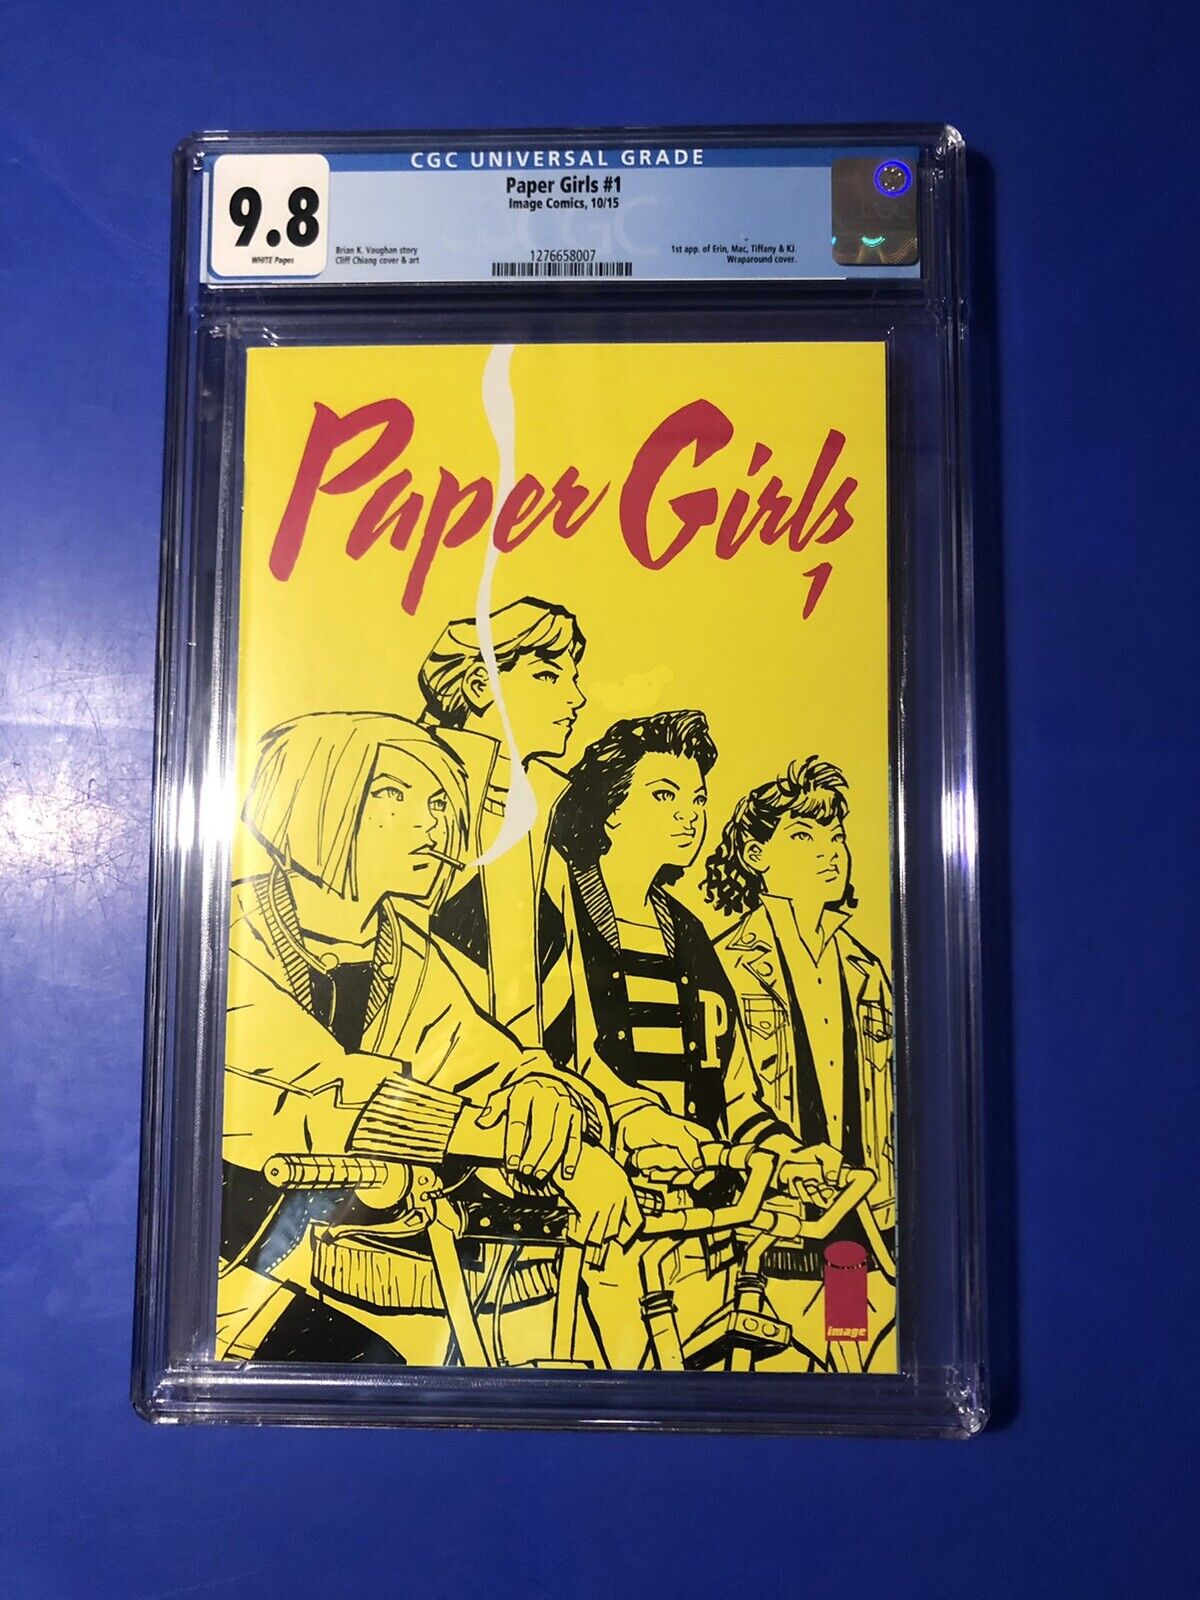 Paper Girls #1 CGC 9.8 1st APPEARANCE Print Main Cover A Image COMIC Amazon 2015